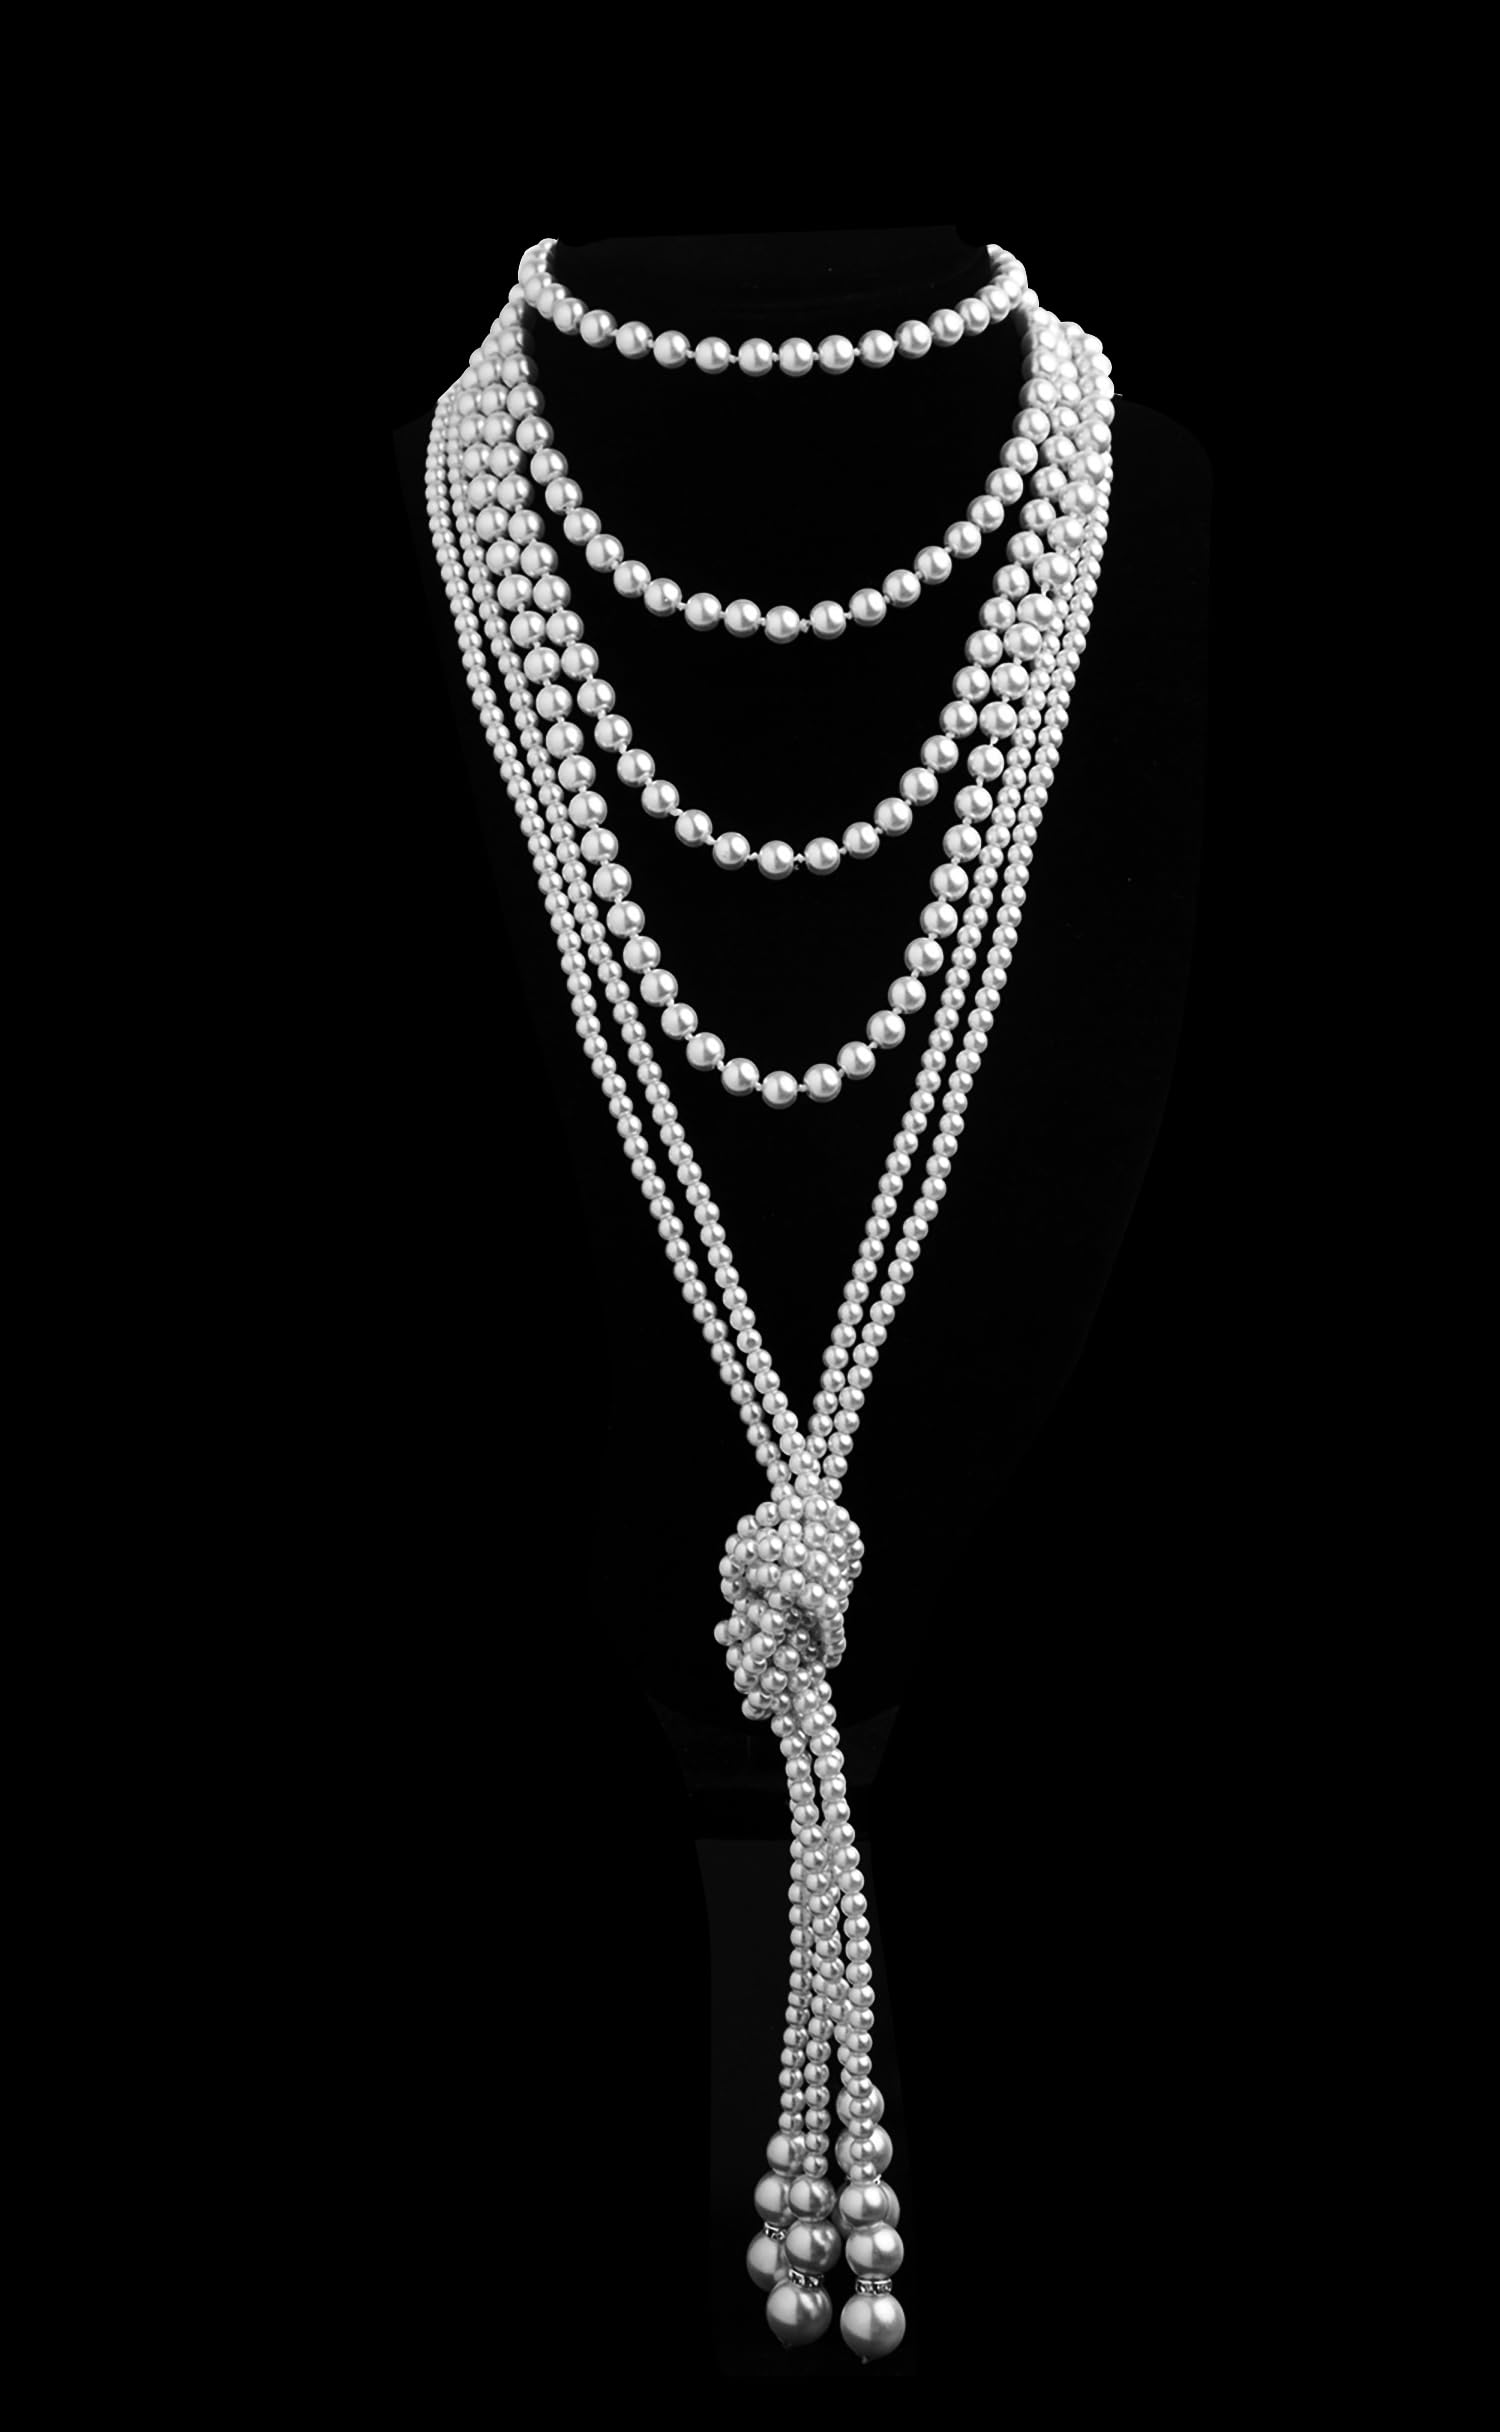  Zivyes Faux Pearl Necklace Long Pearl Necklaces 1920s